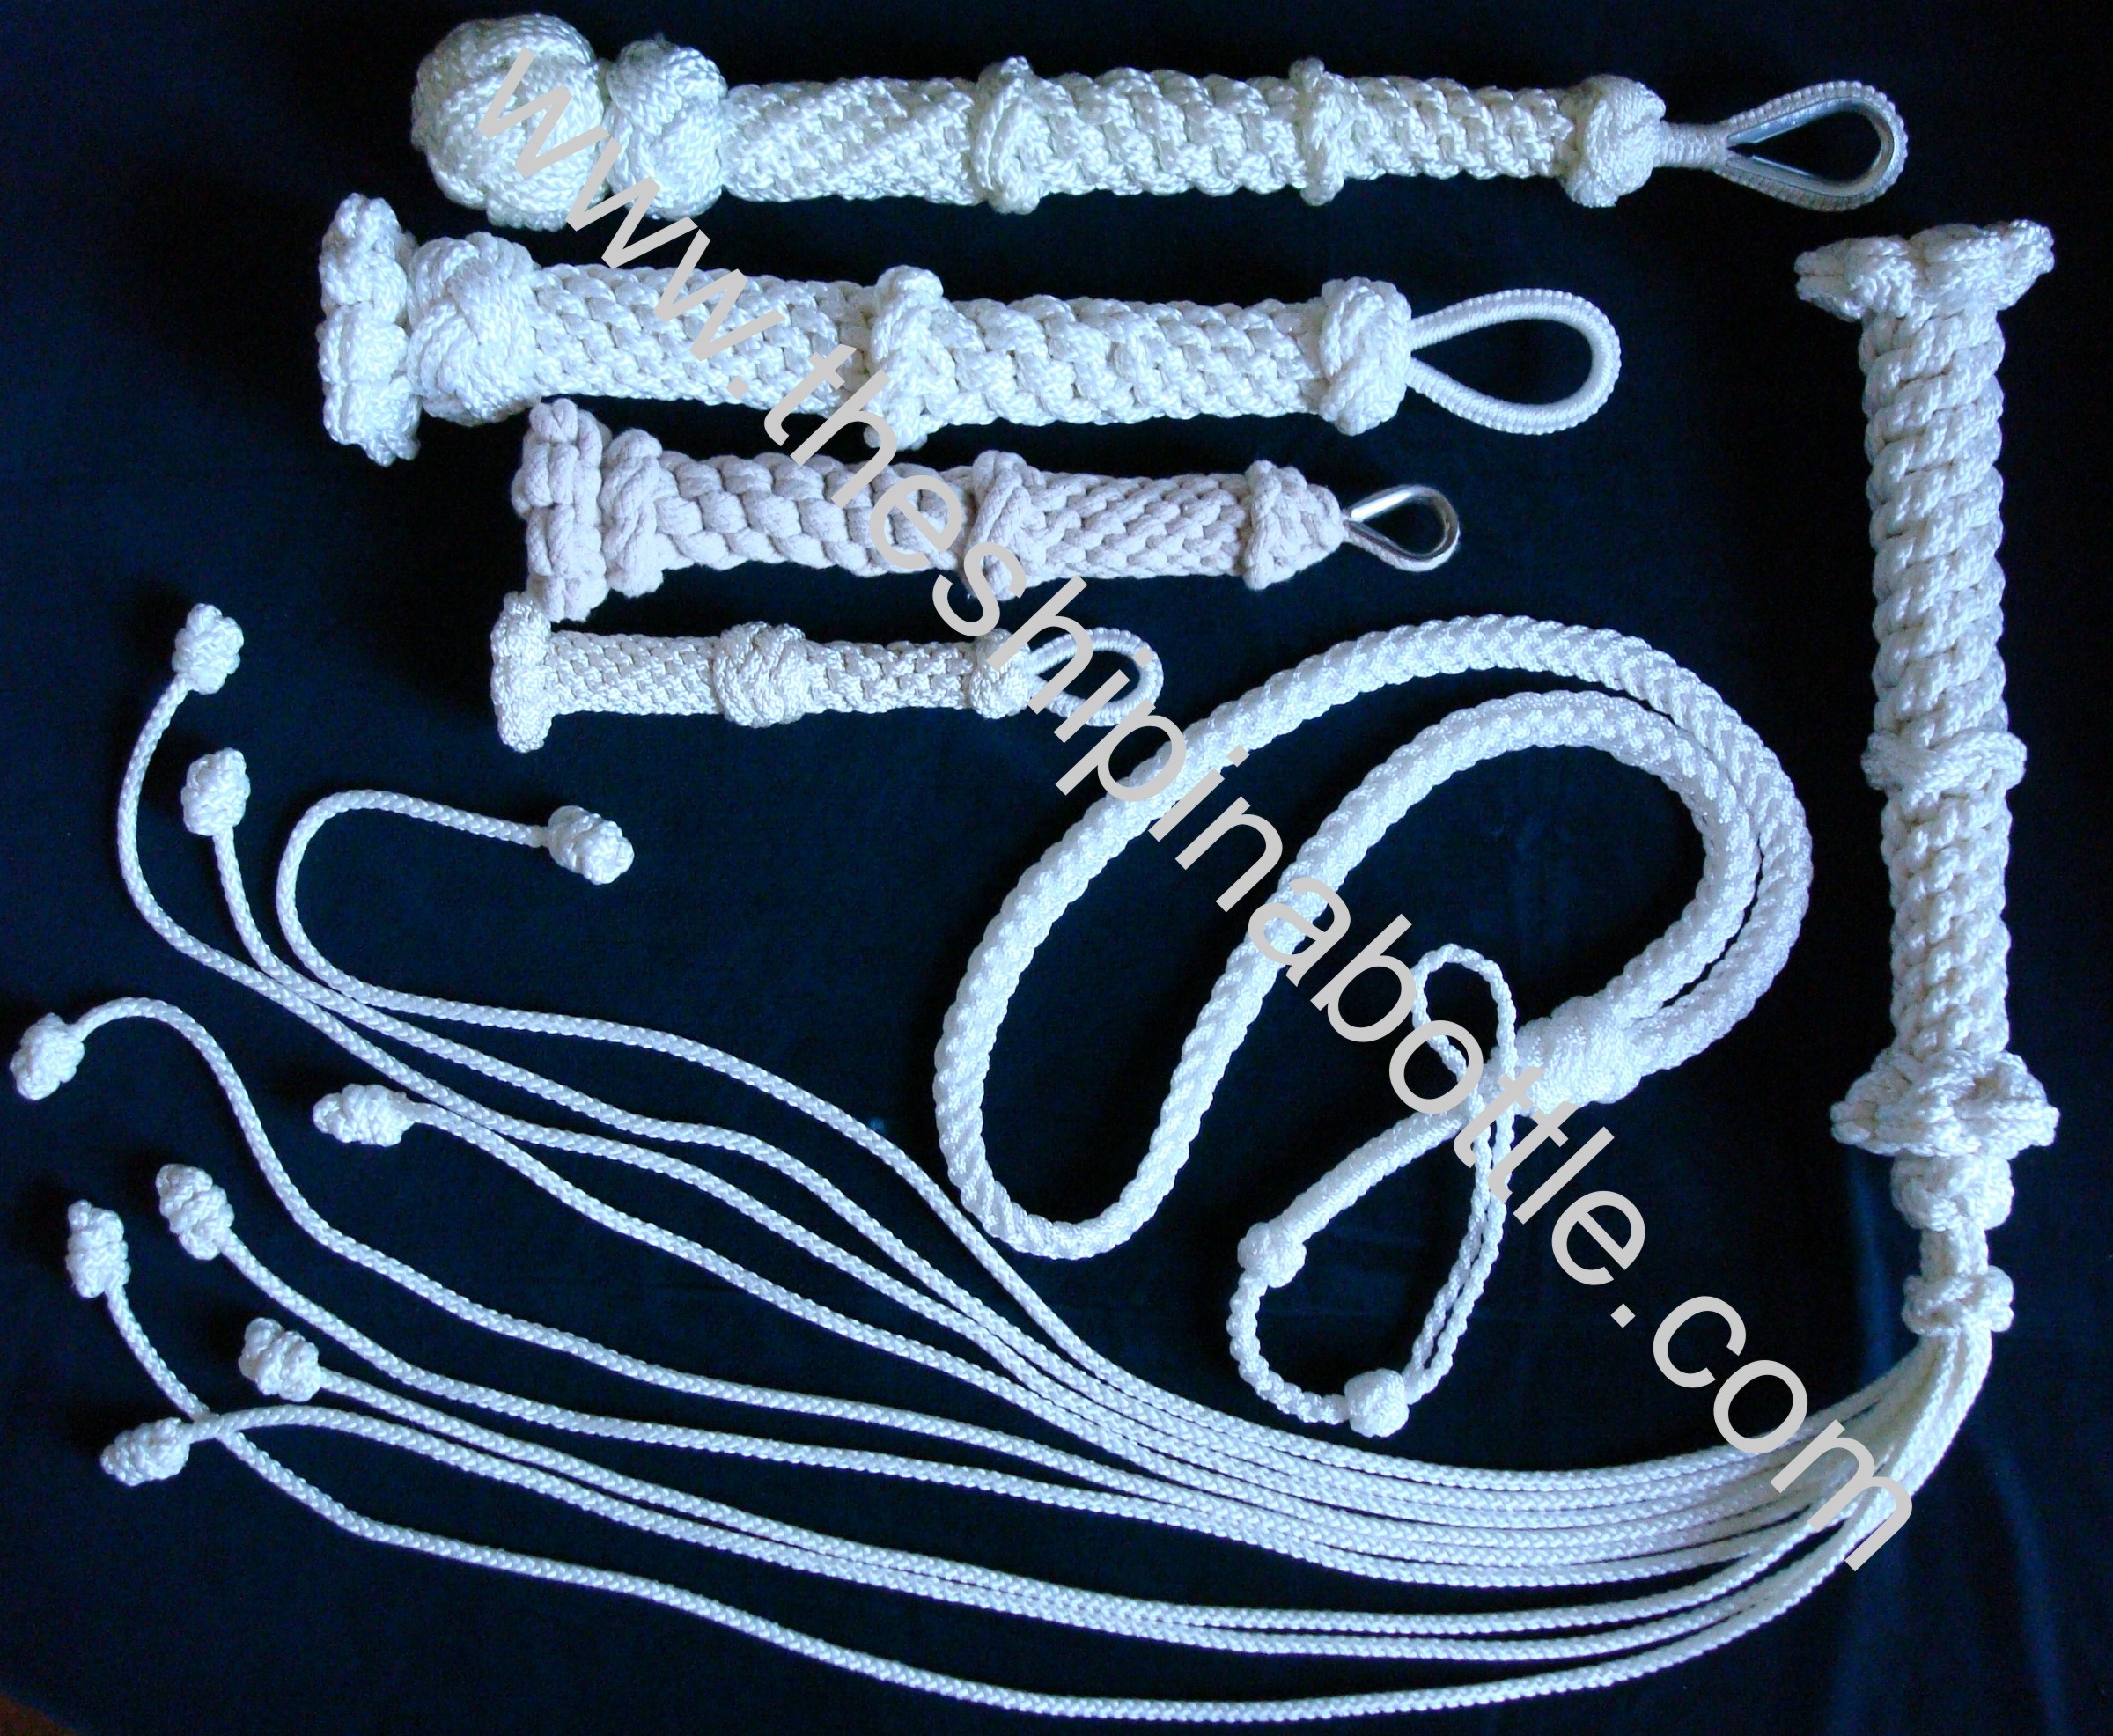 More Bell Rope Samples